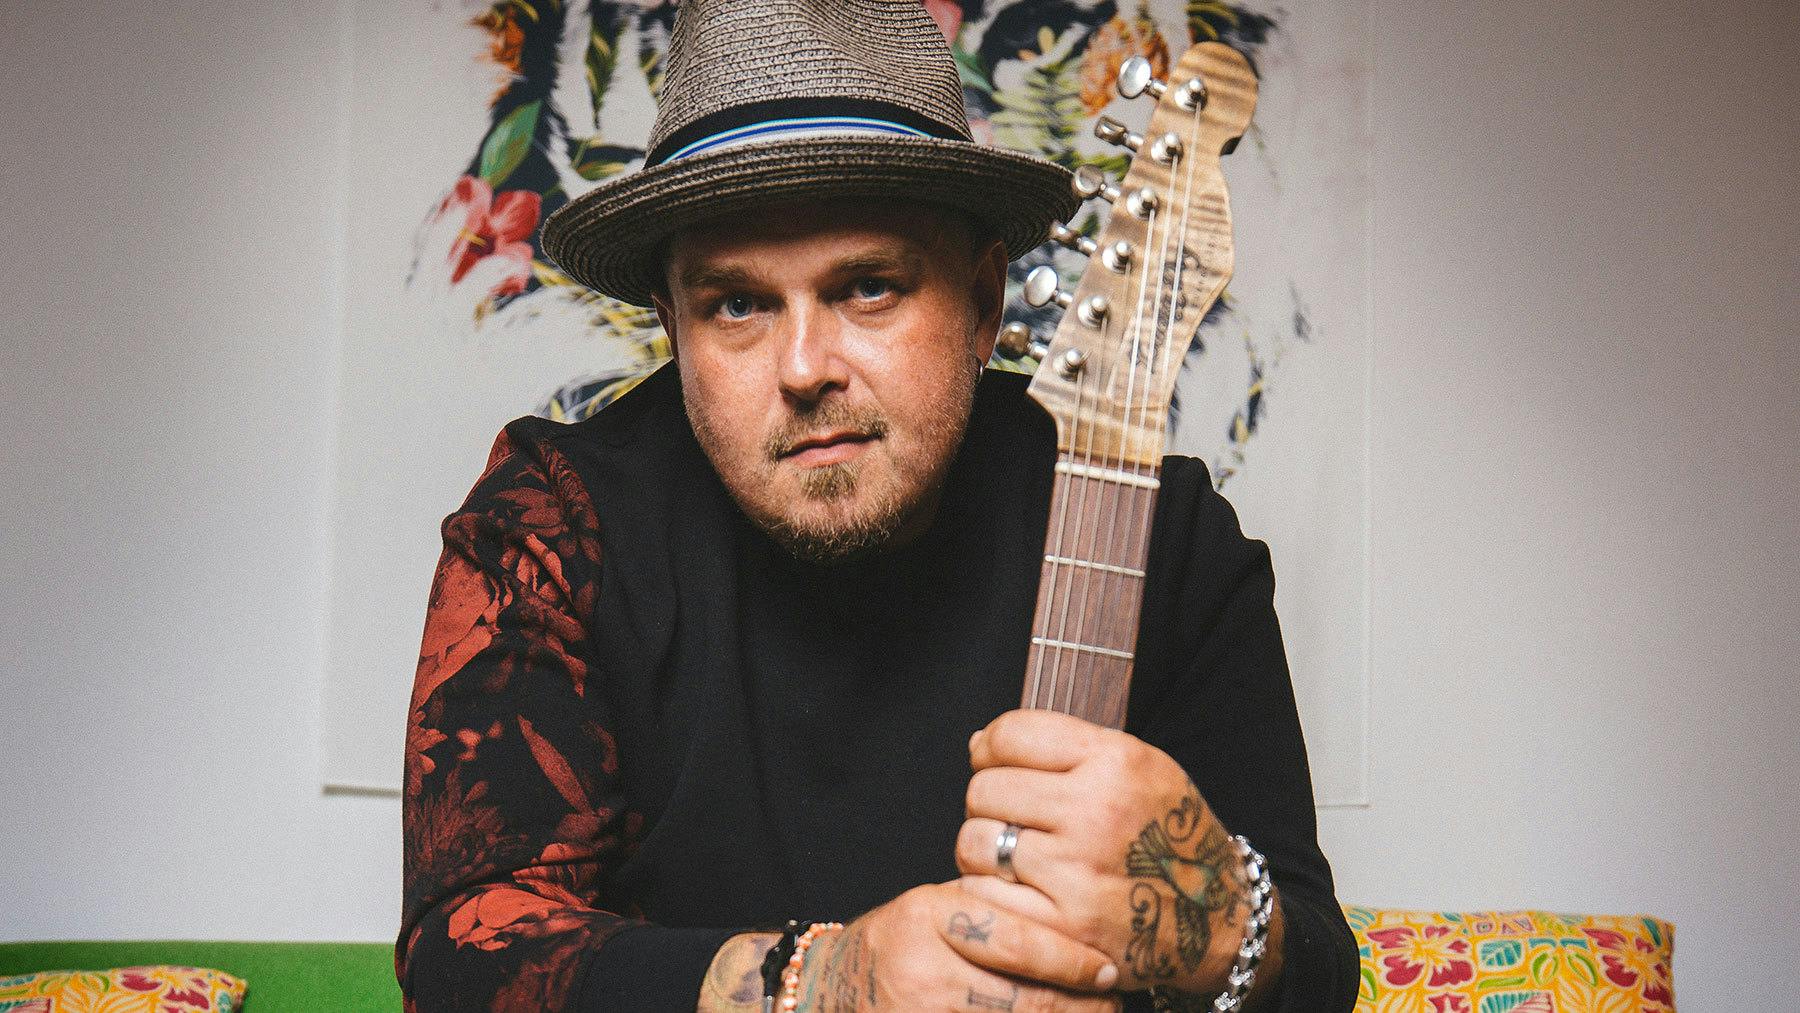 Black Stone Cherry's Chris Robertson: The 10 Songs That Changed My Life